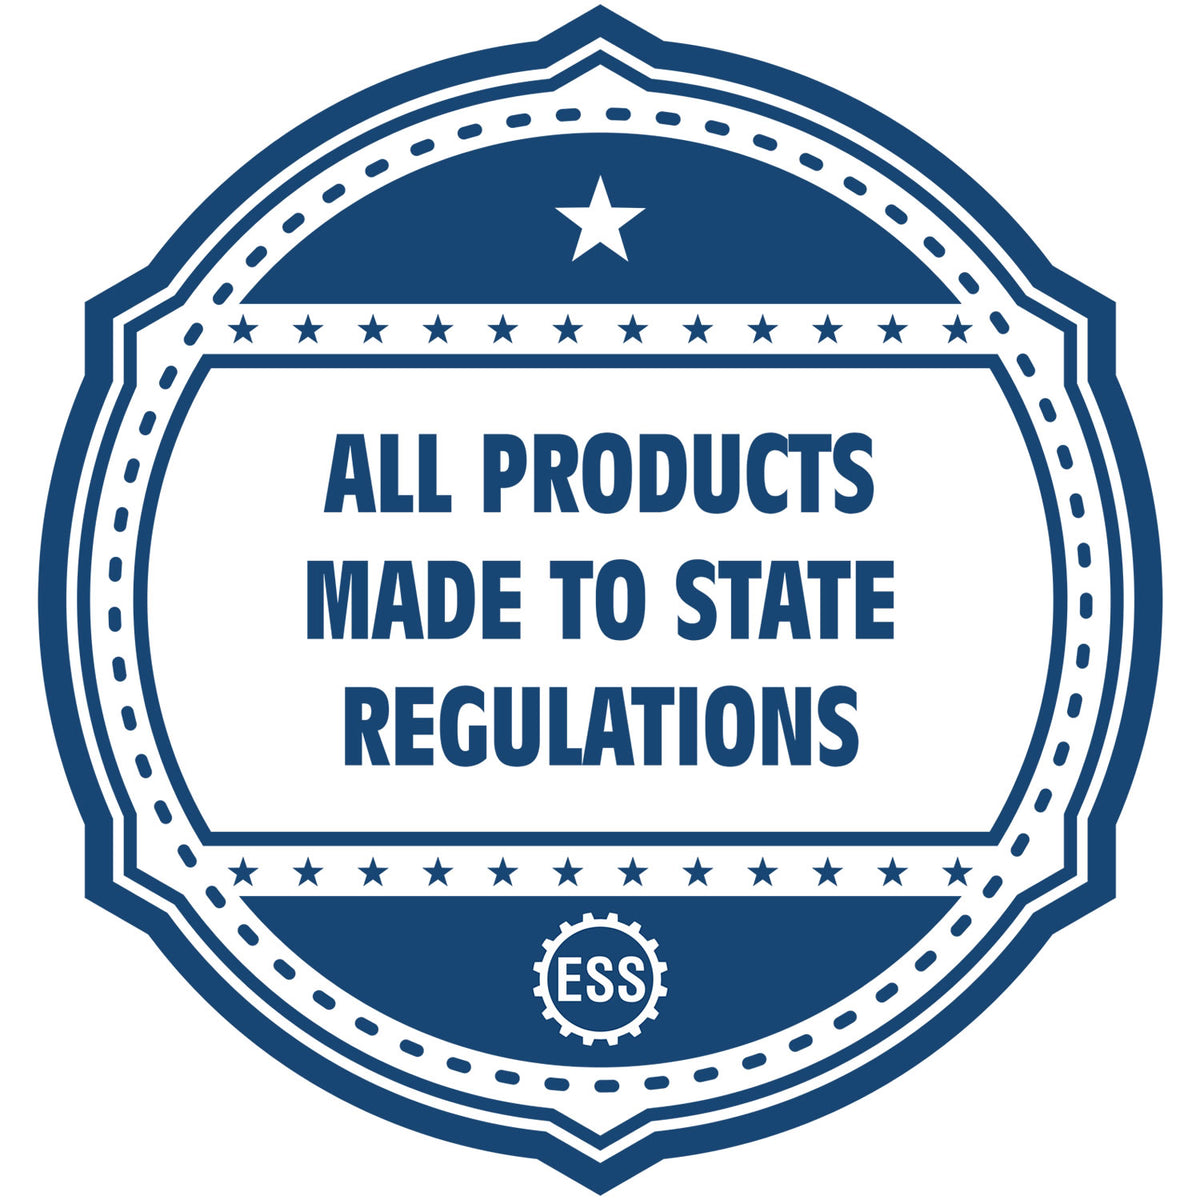 An icon or badge element for the Soft Pocket Oklahoma Landscape Architect Embosser showing that this product is made in compliance with state regulations.